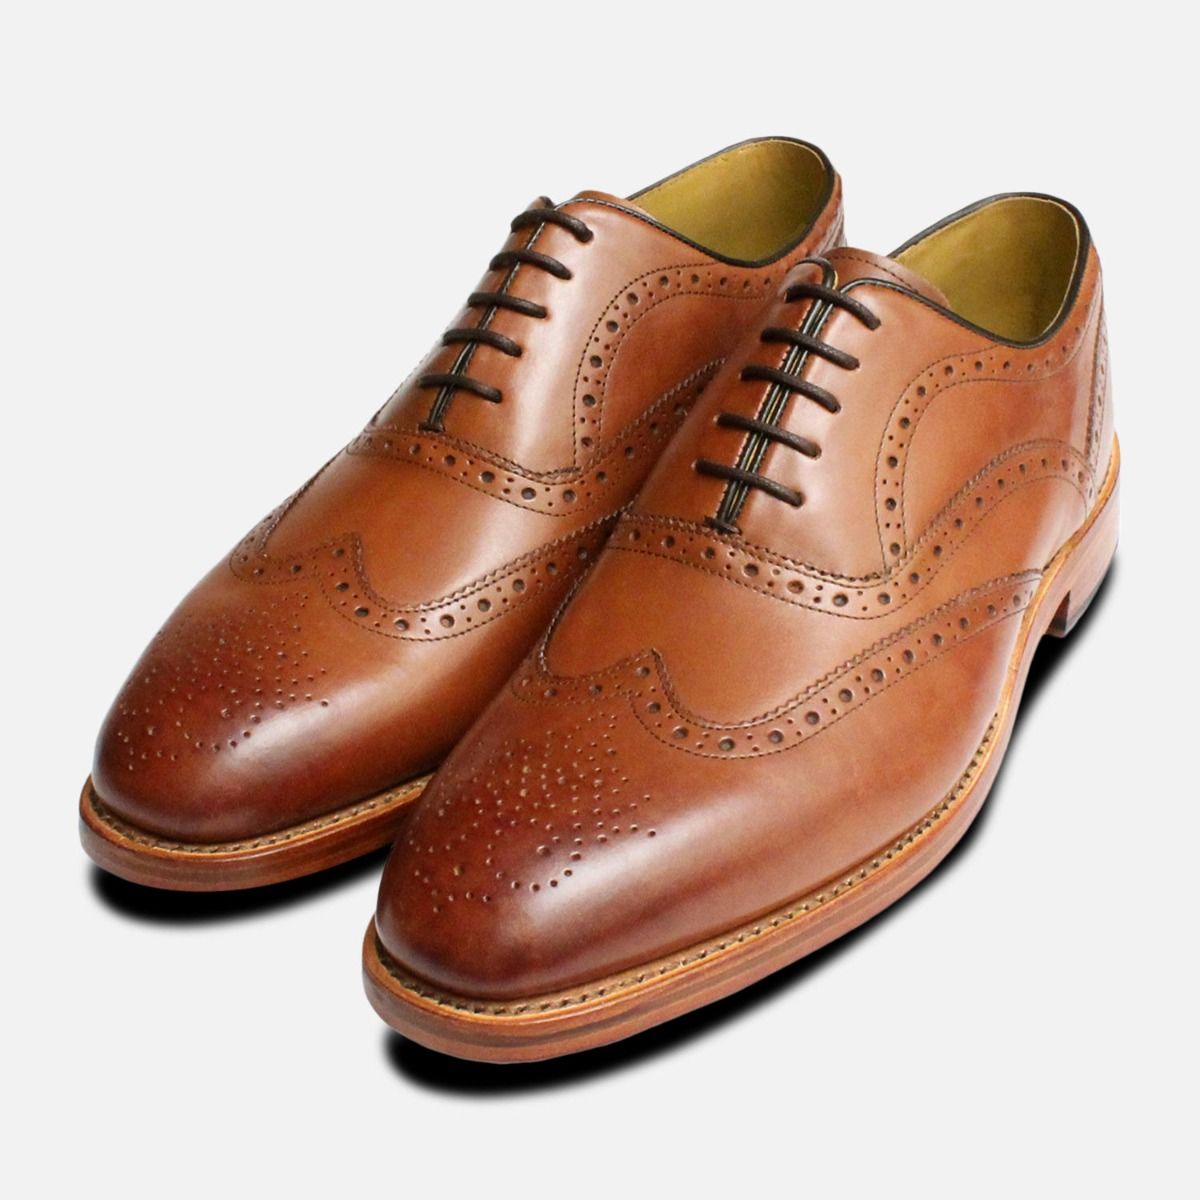 Oliver Sweeney Shoes Dark Tan Oxford 